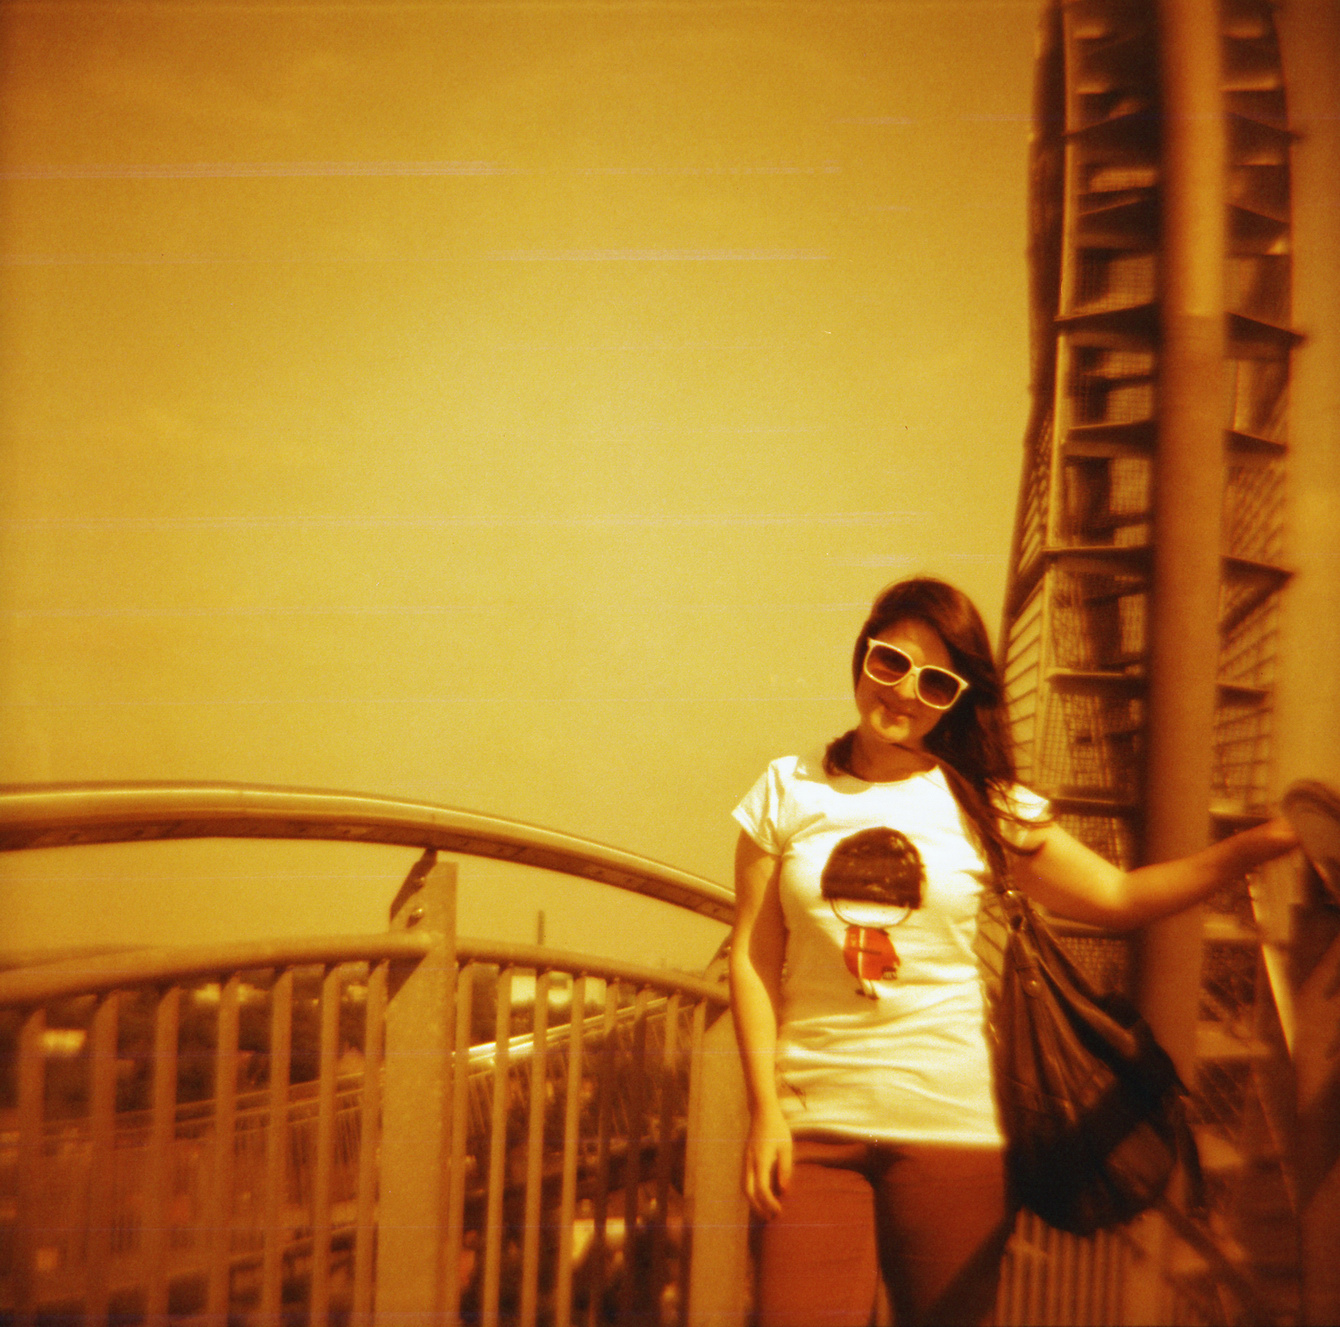 Tiger & Turtle in Duisburg - Redscale Diana F+ - "Fee ist mein Name"